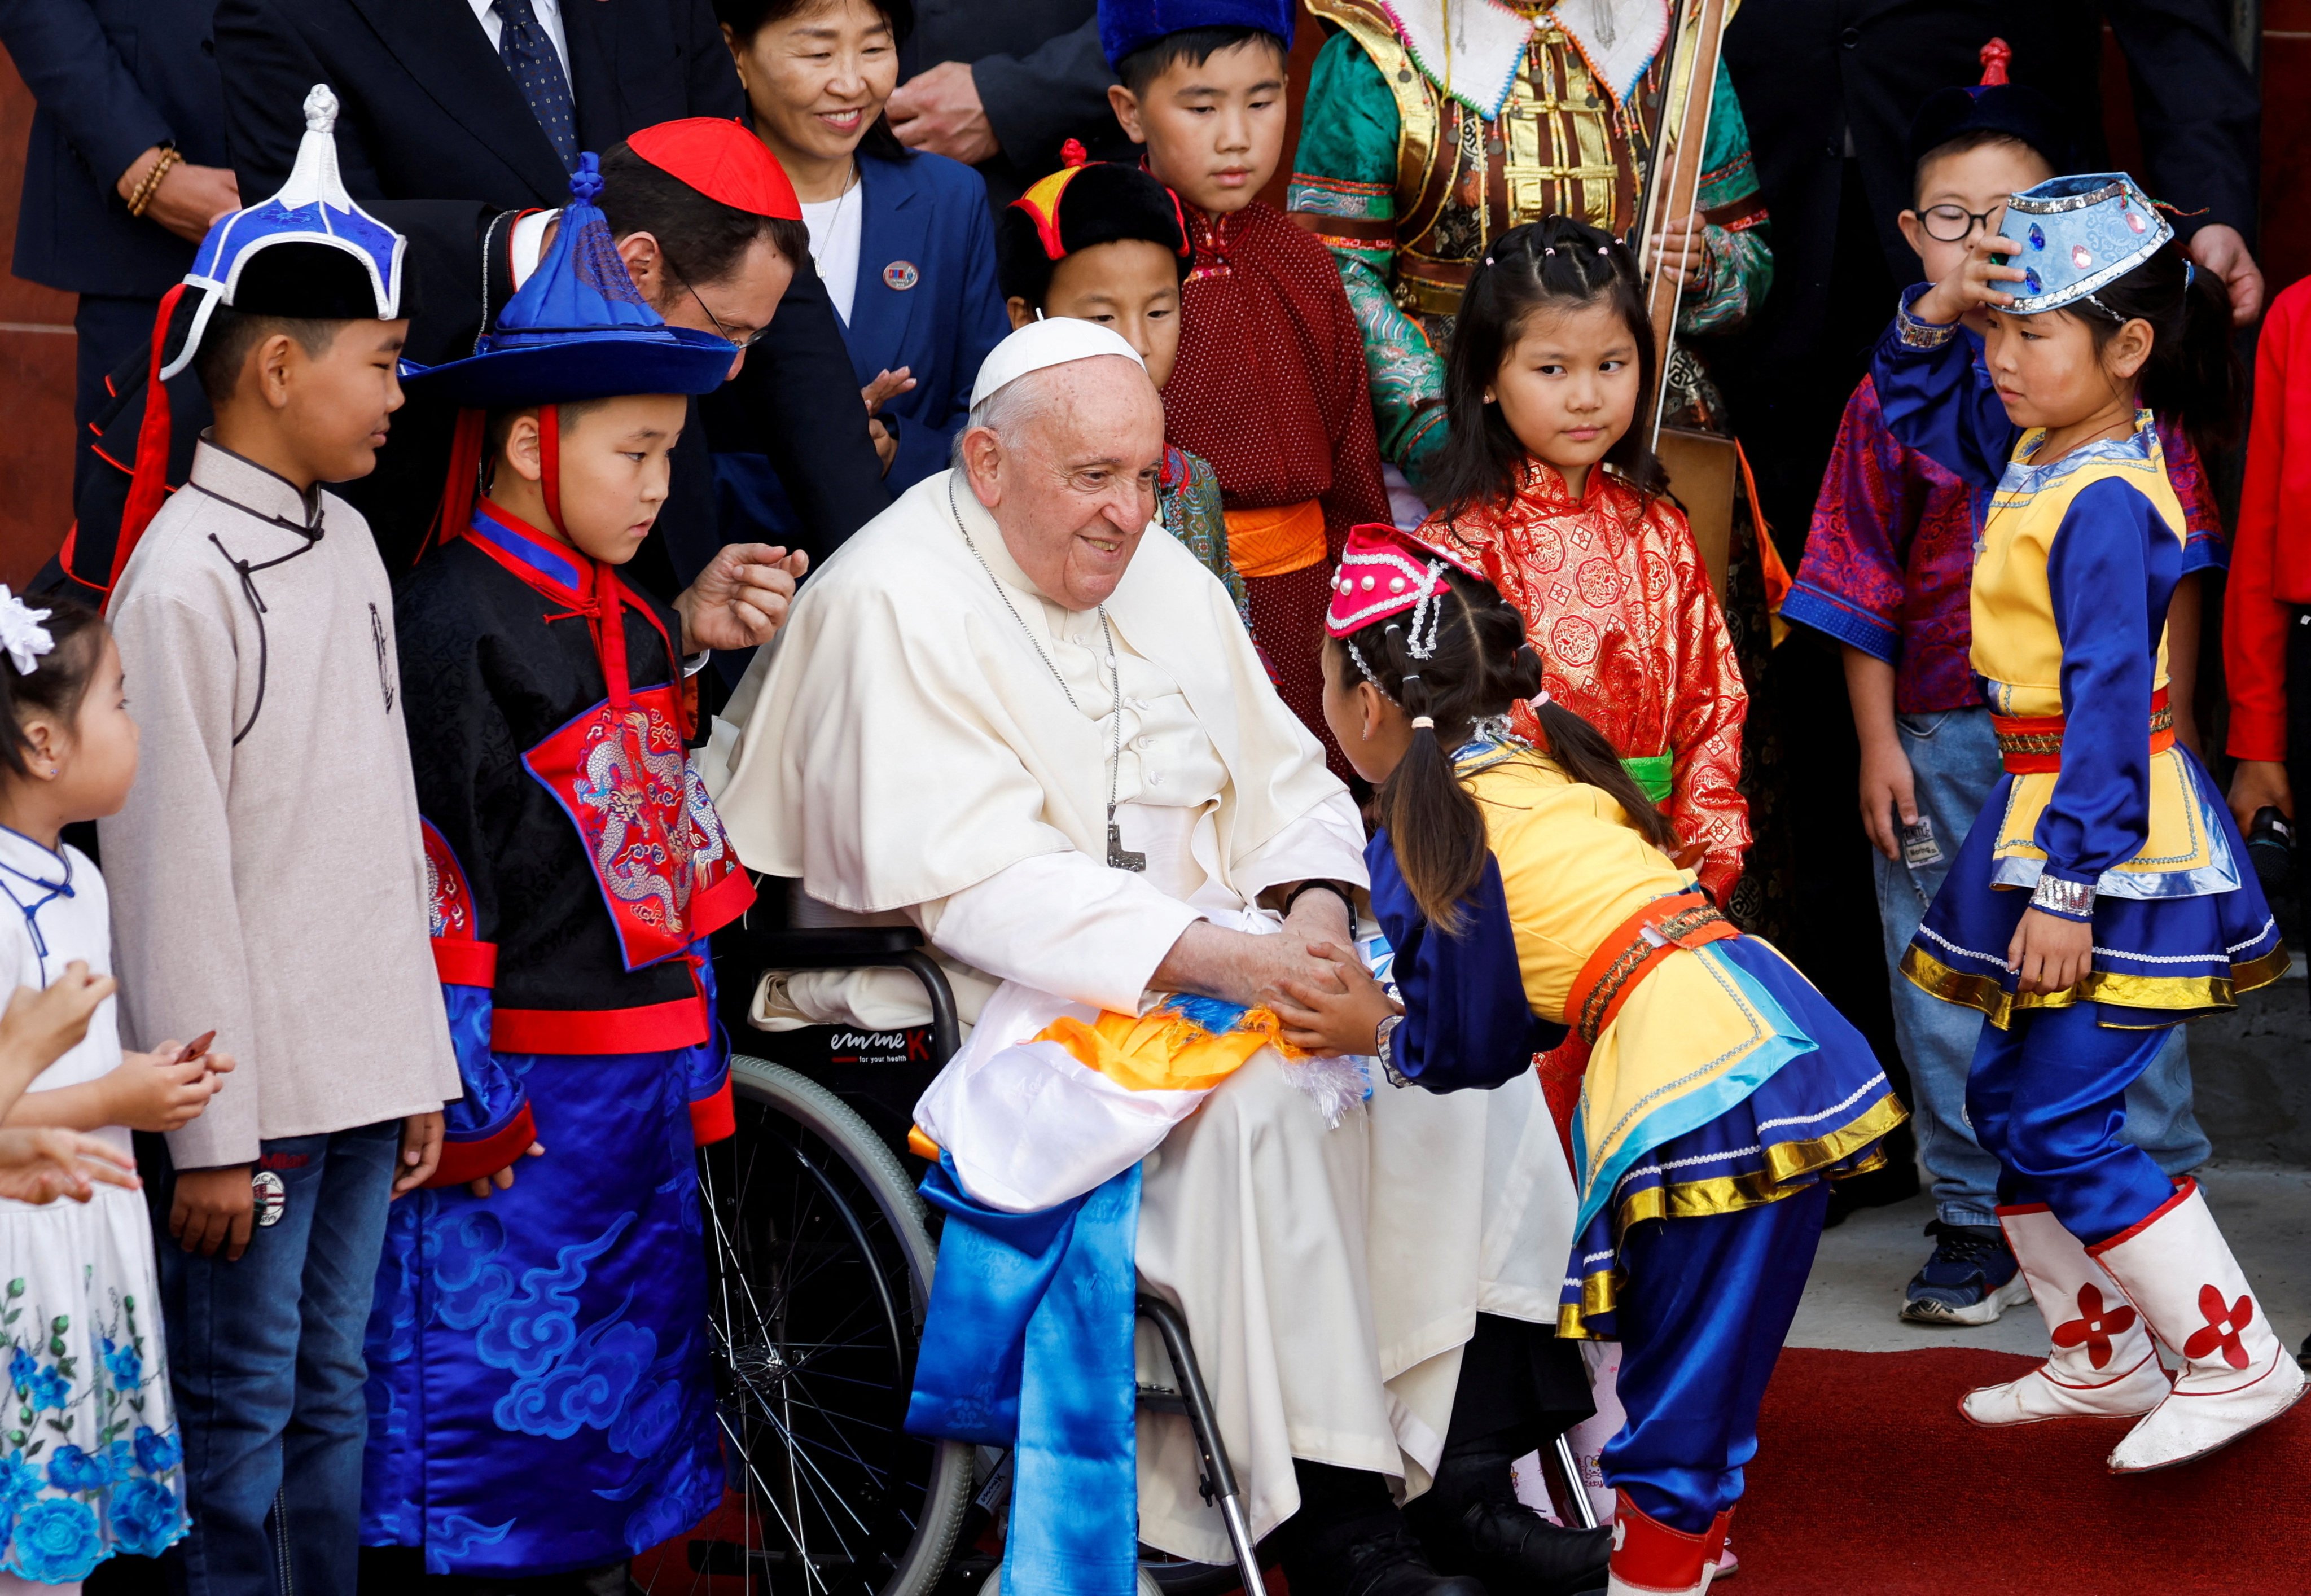 Pope Francis greets a child during a welcoming ceremony in Ulaanbaatar, Mongolia. Photo: Reuters